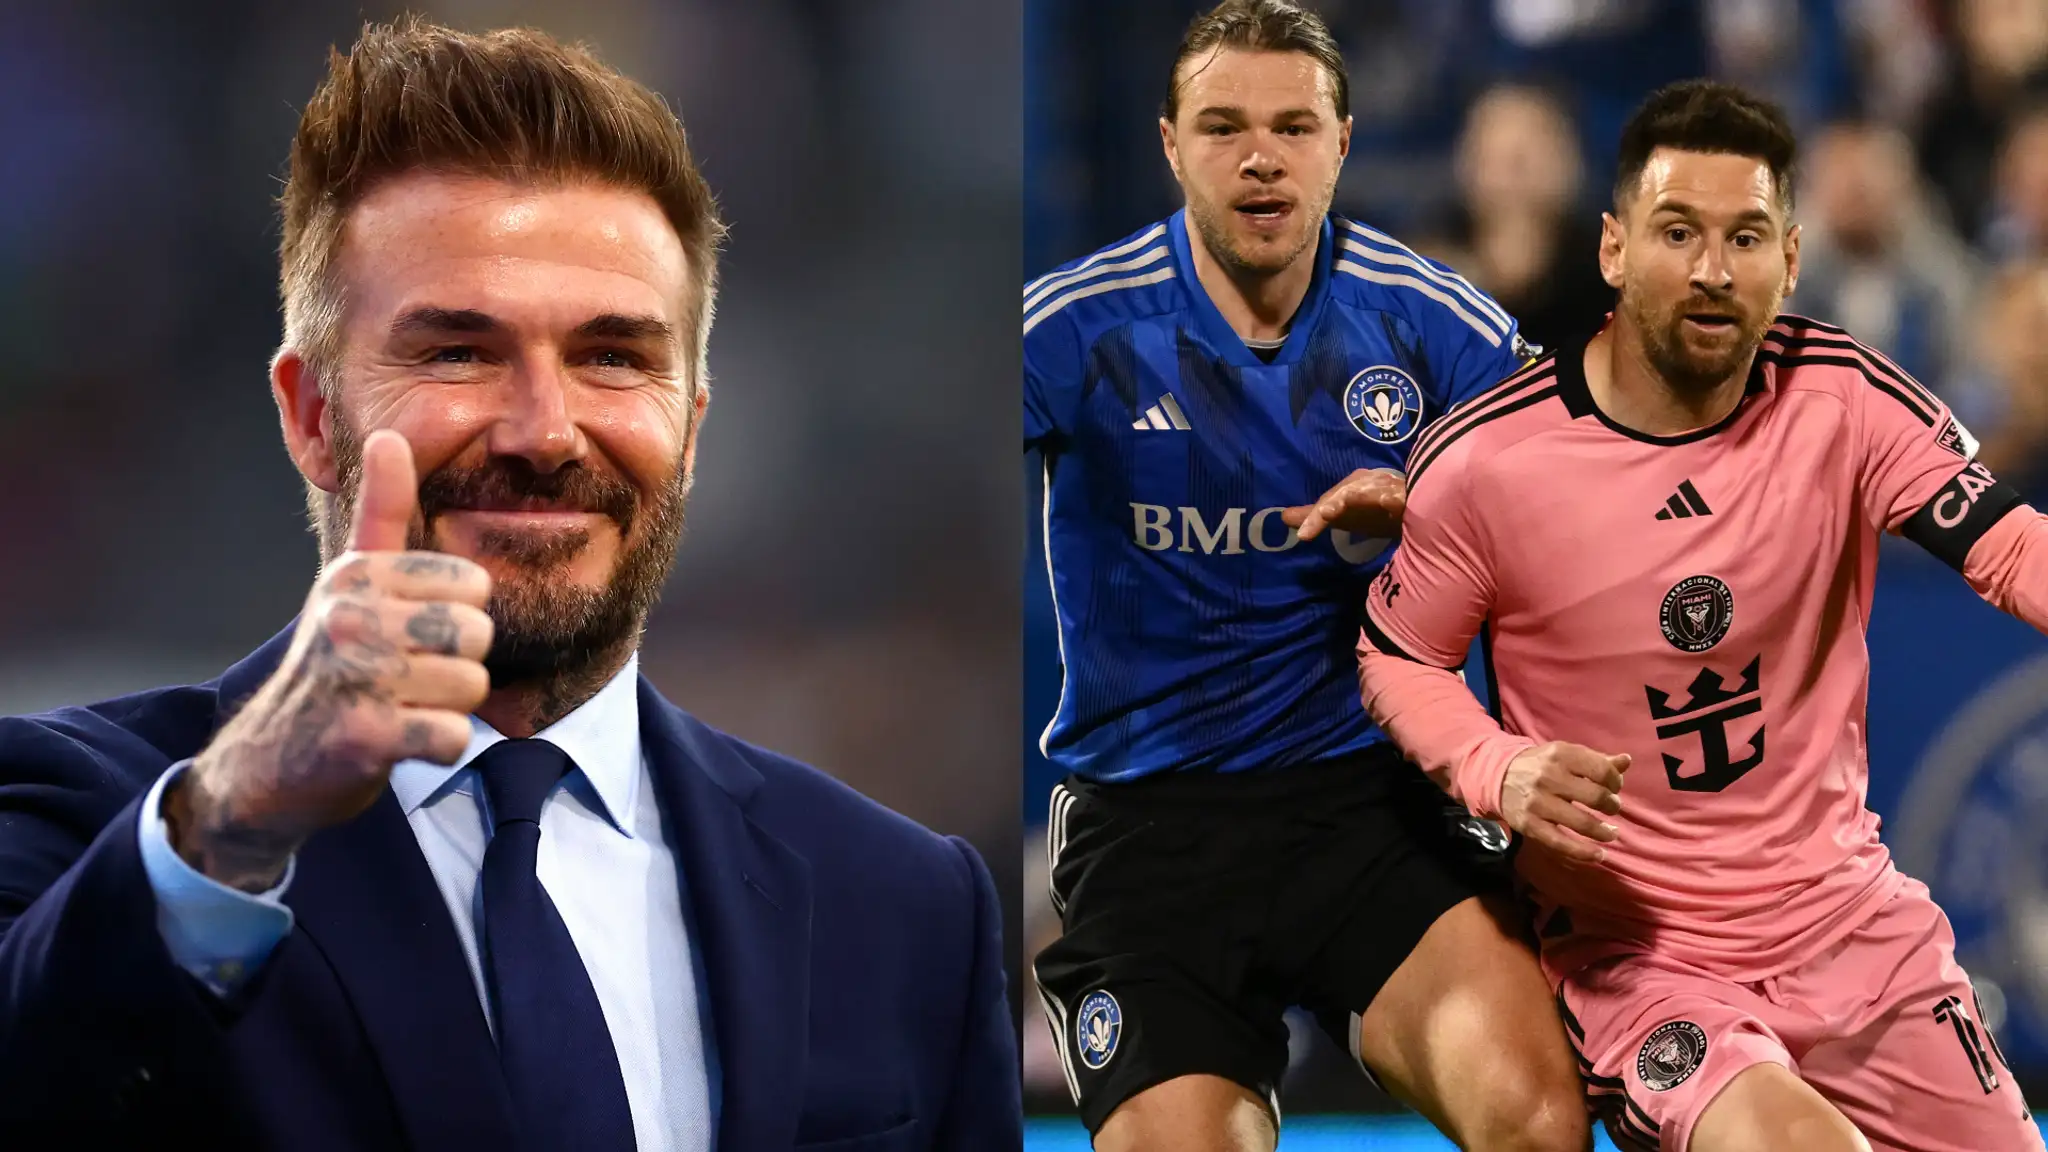 Inter Miami owner David Beckham left delighted by CF Montreal MLS comeback as ex-Man Utd star sends message to Lionel Messi and Co